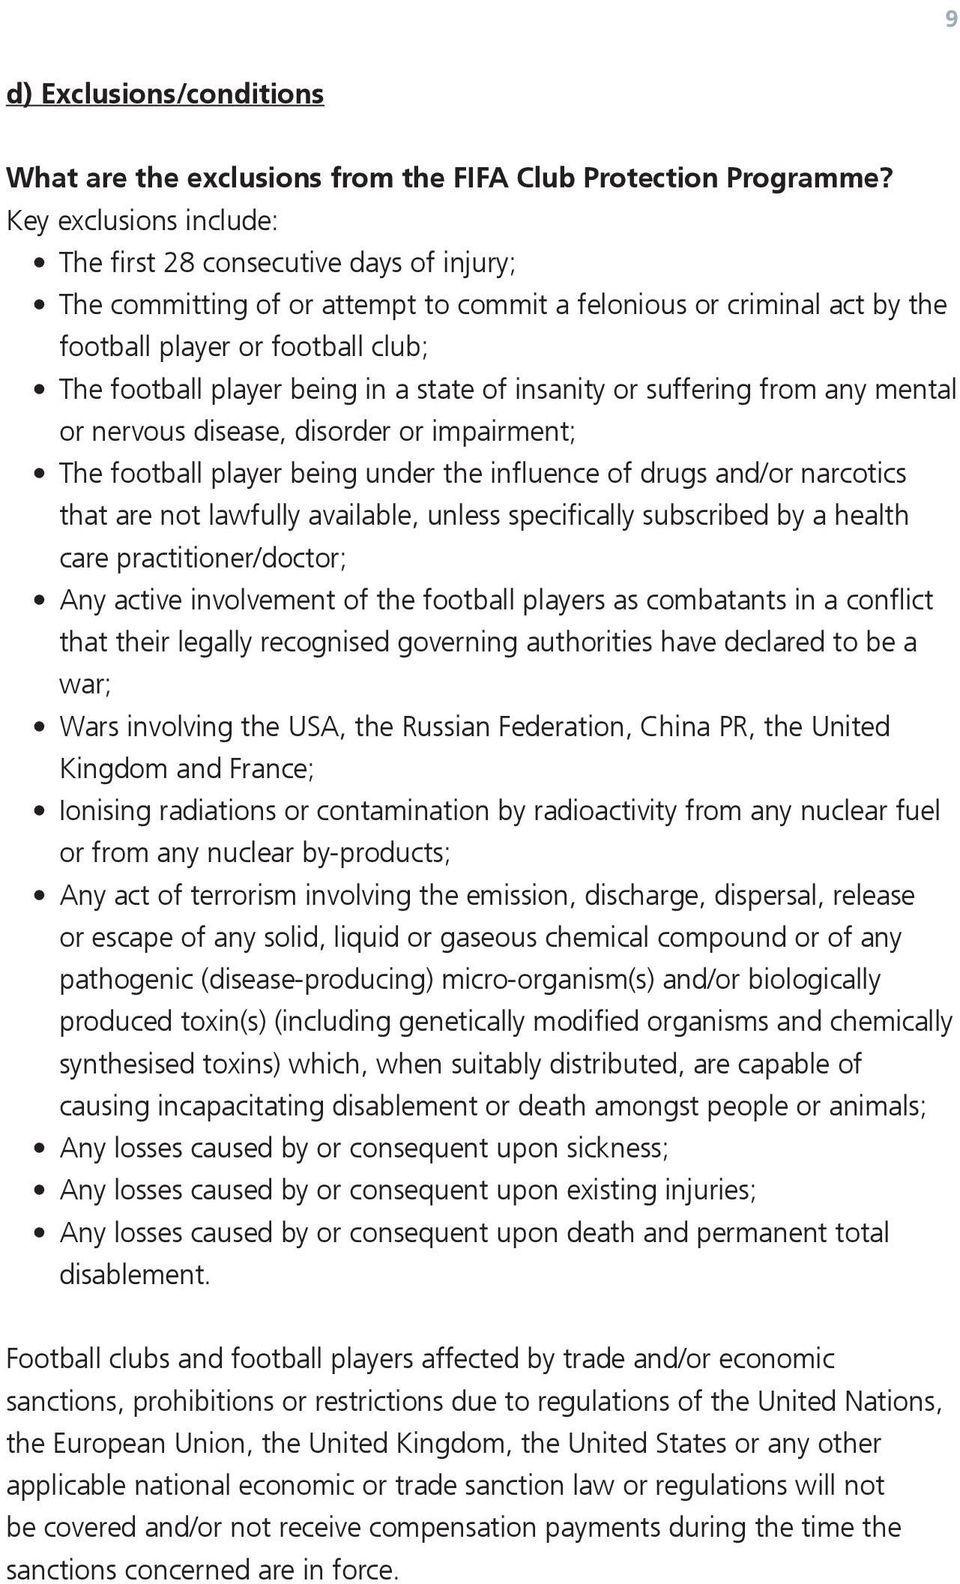 insanity or suffering from any mental or nervous disease, disorder or impairment; The football player being under influence drugs /or narcotics that are not lawfully available, unless specifically